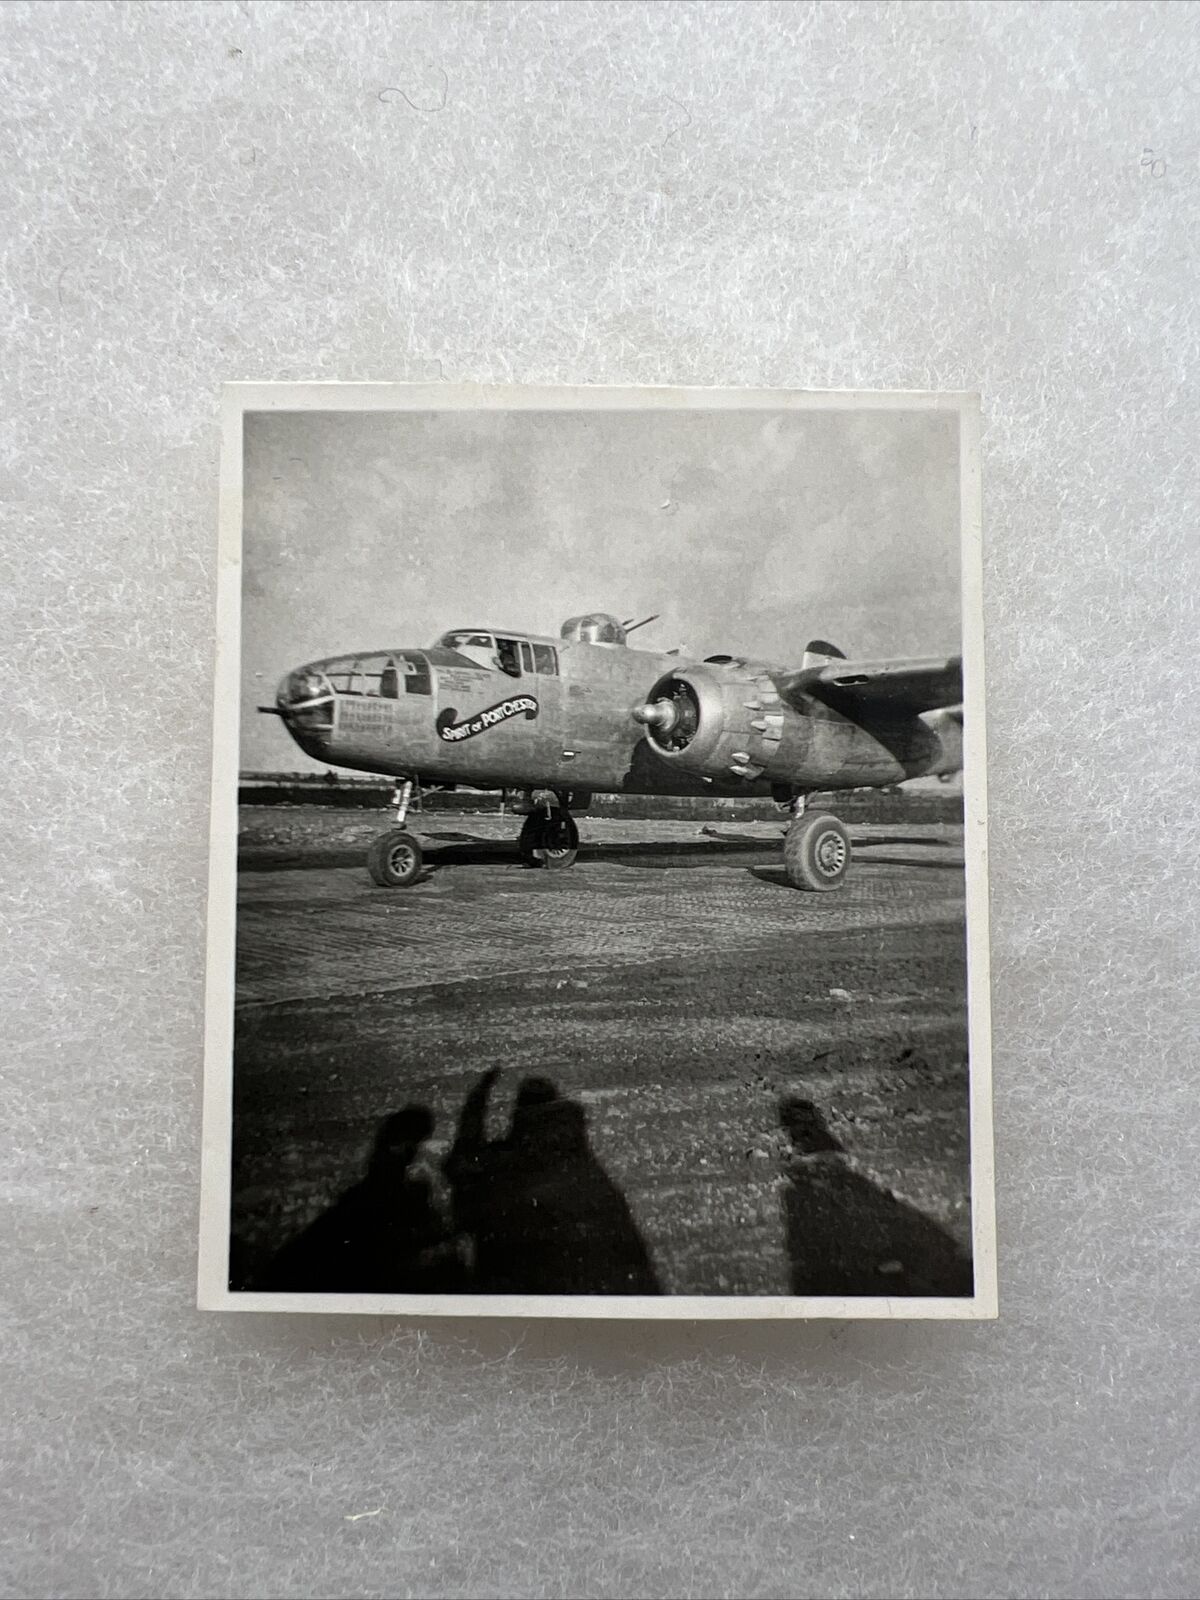 WW2 US Army Air Corps Nose Art Painted Plane Photo (V178